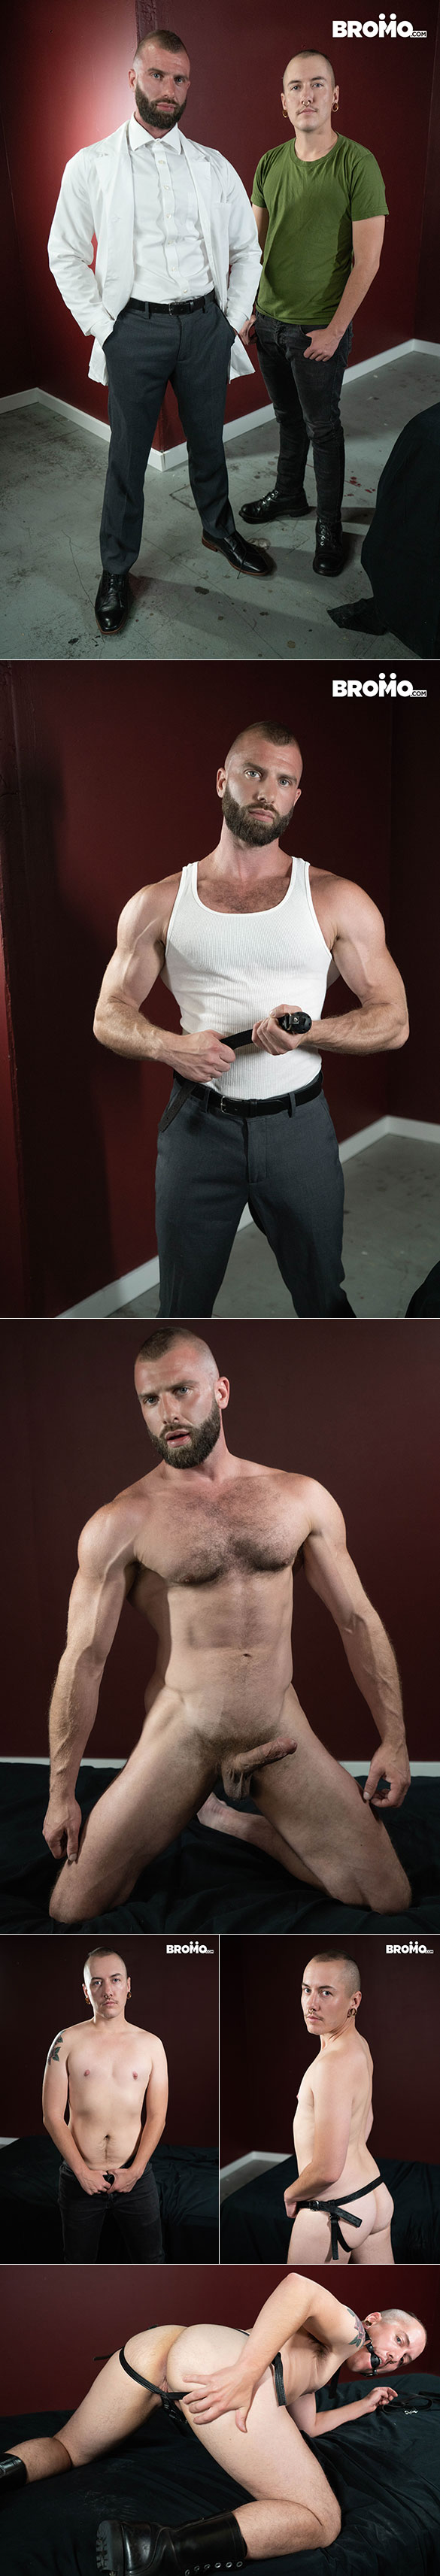 Bromo: Donnie Argento pounds James Darling bareback in "Prescription: To Be Fucked"